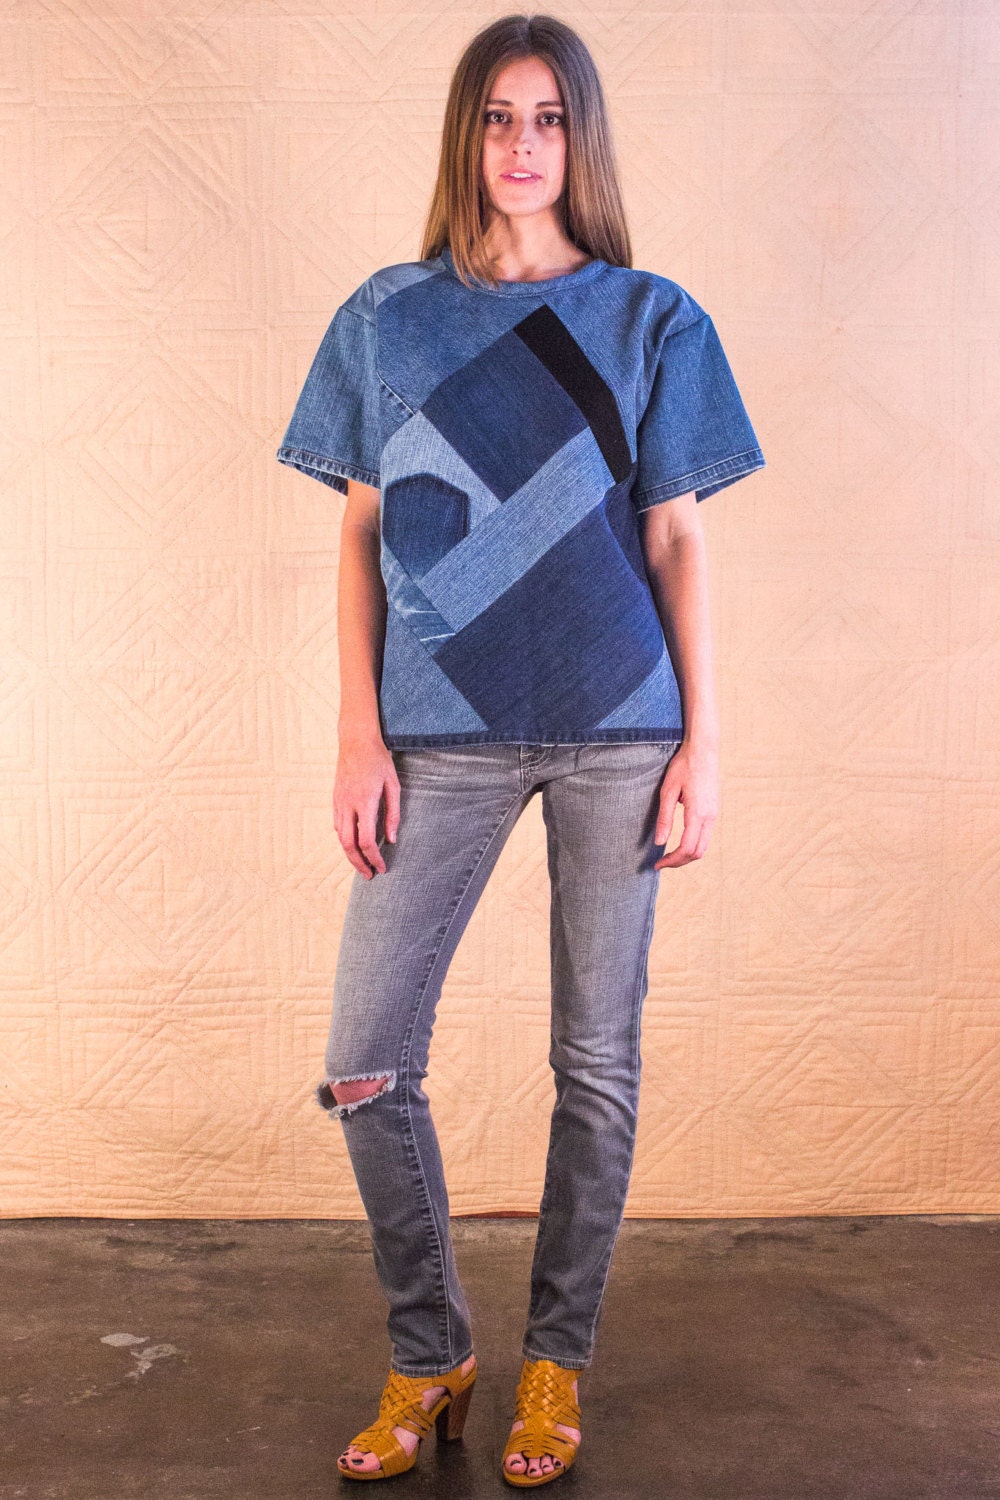 Recycled Denim Patchwork Top Unisex Handmade by Silkdenim One of a Kind ...